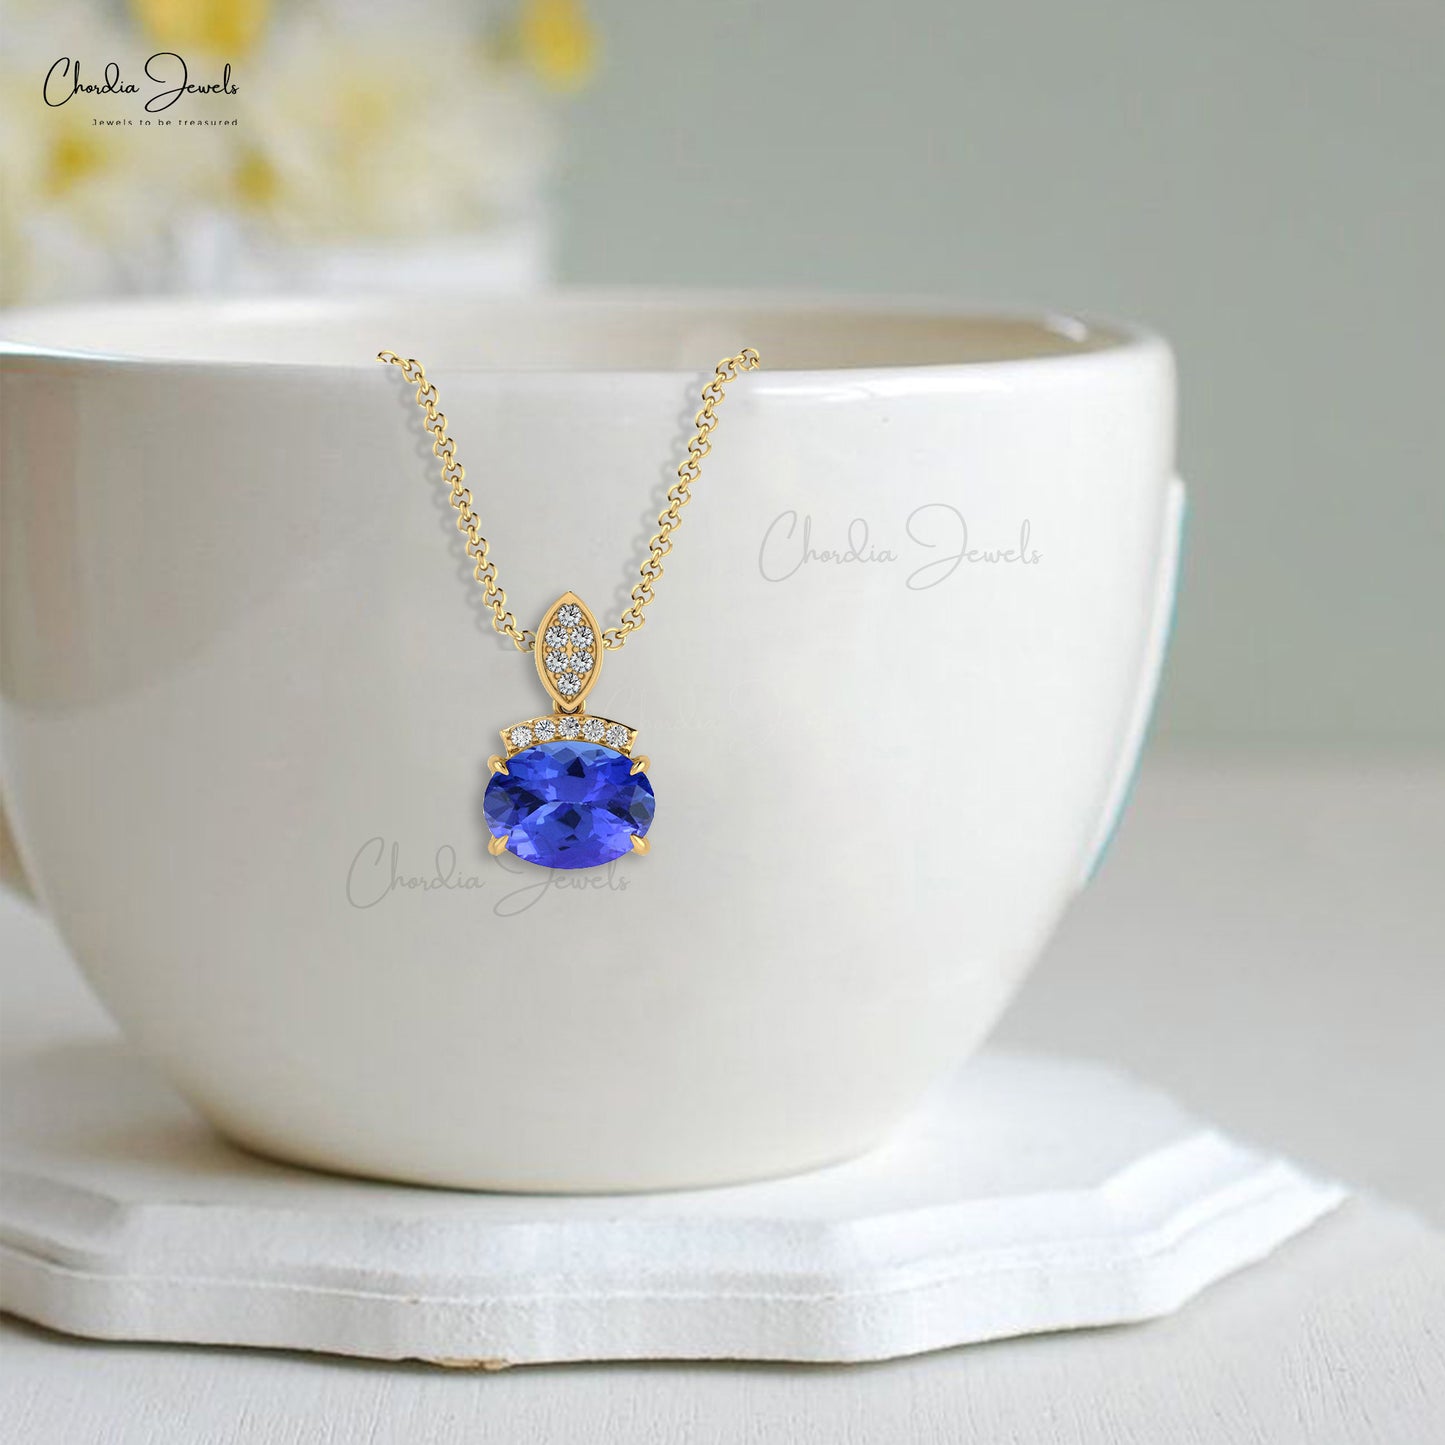 Load image into Gallery viewer, Elegant Design Handmade Diamond Dainty Pendant Necklace Natural Tanzanite Gemstone Pendant in 14k Pure Gold Gift For Wife
